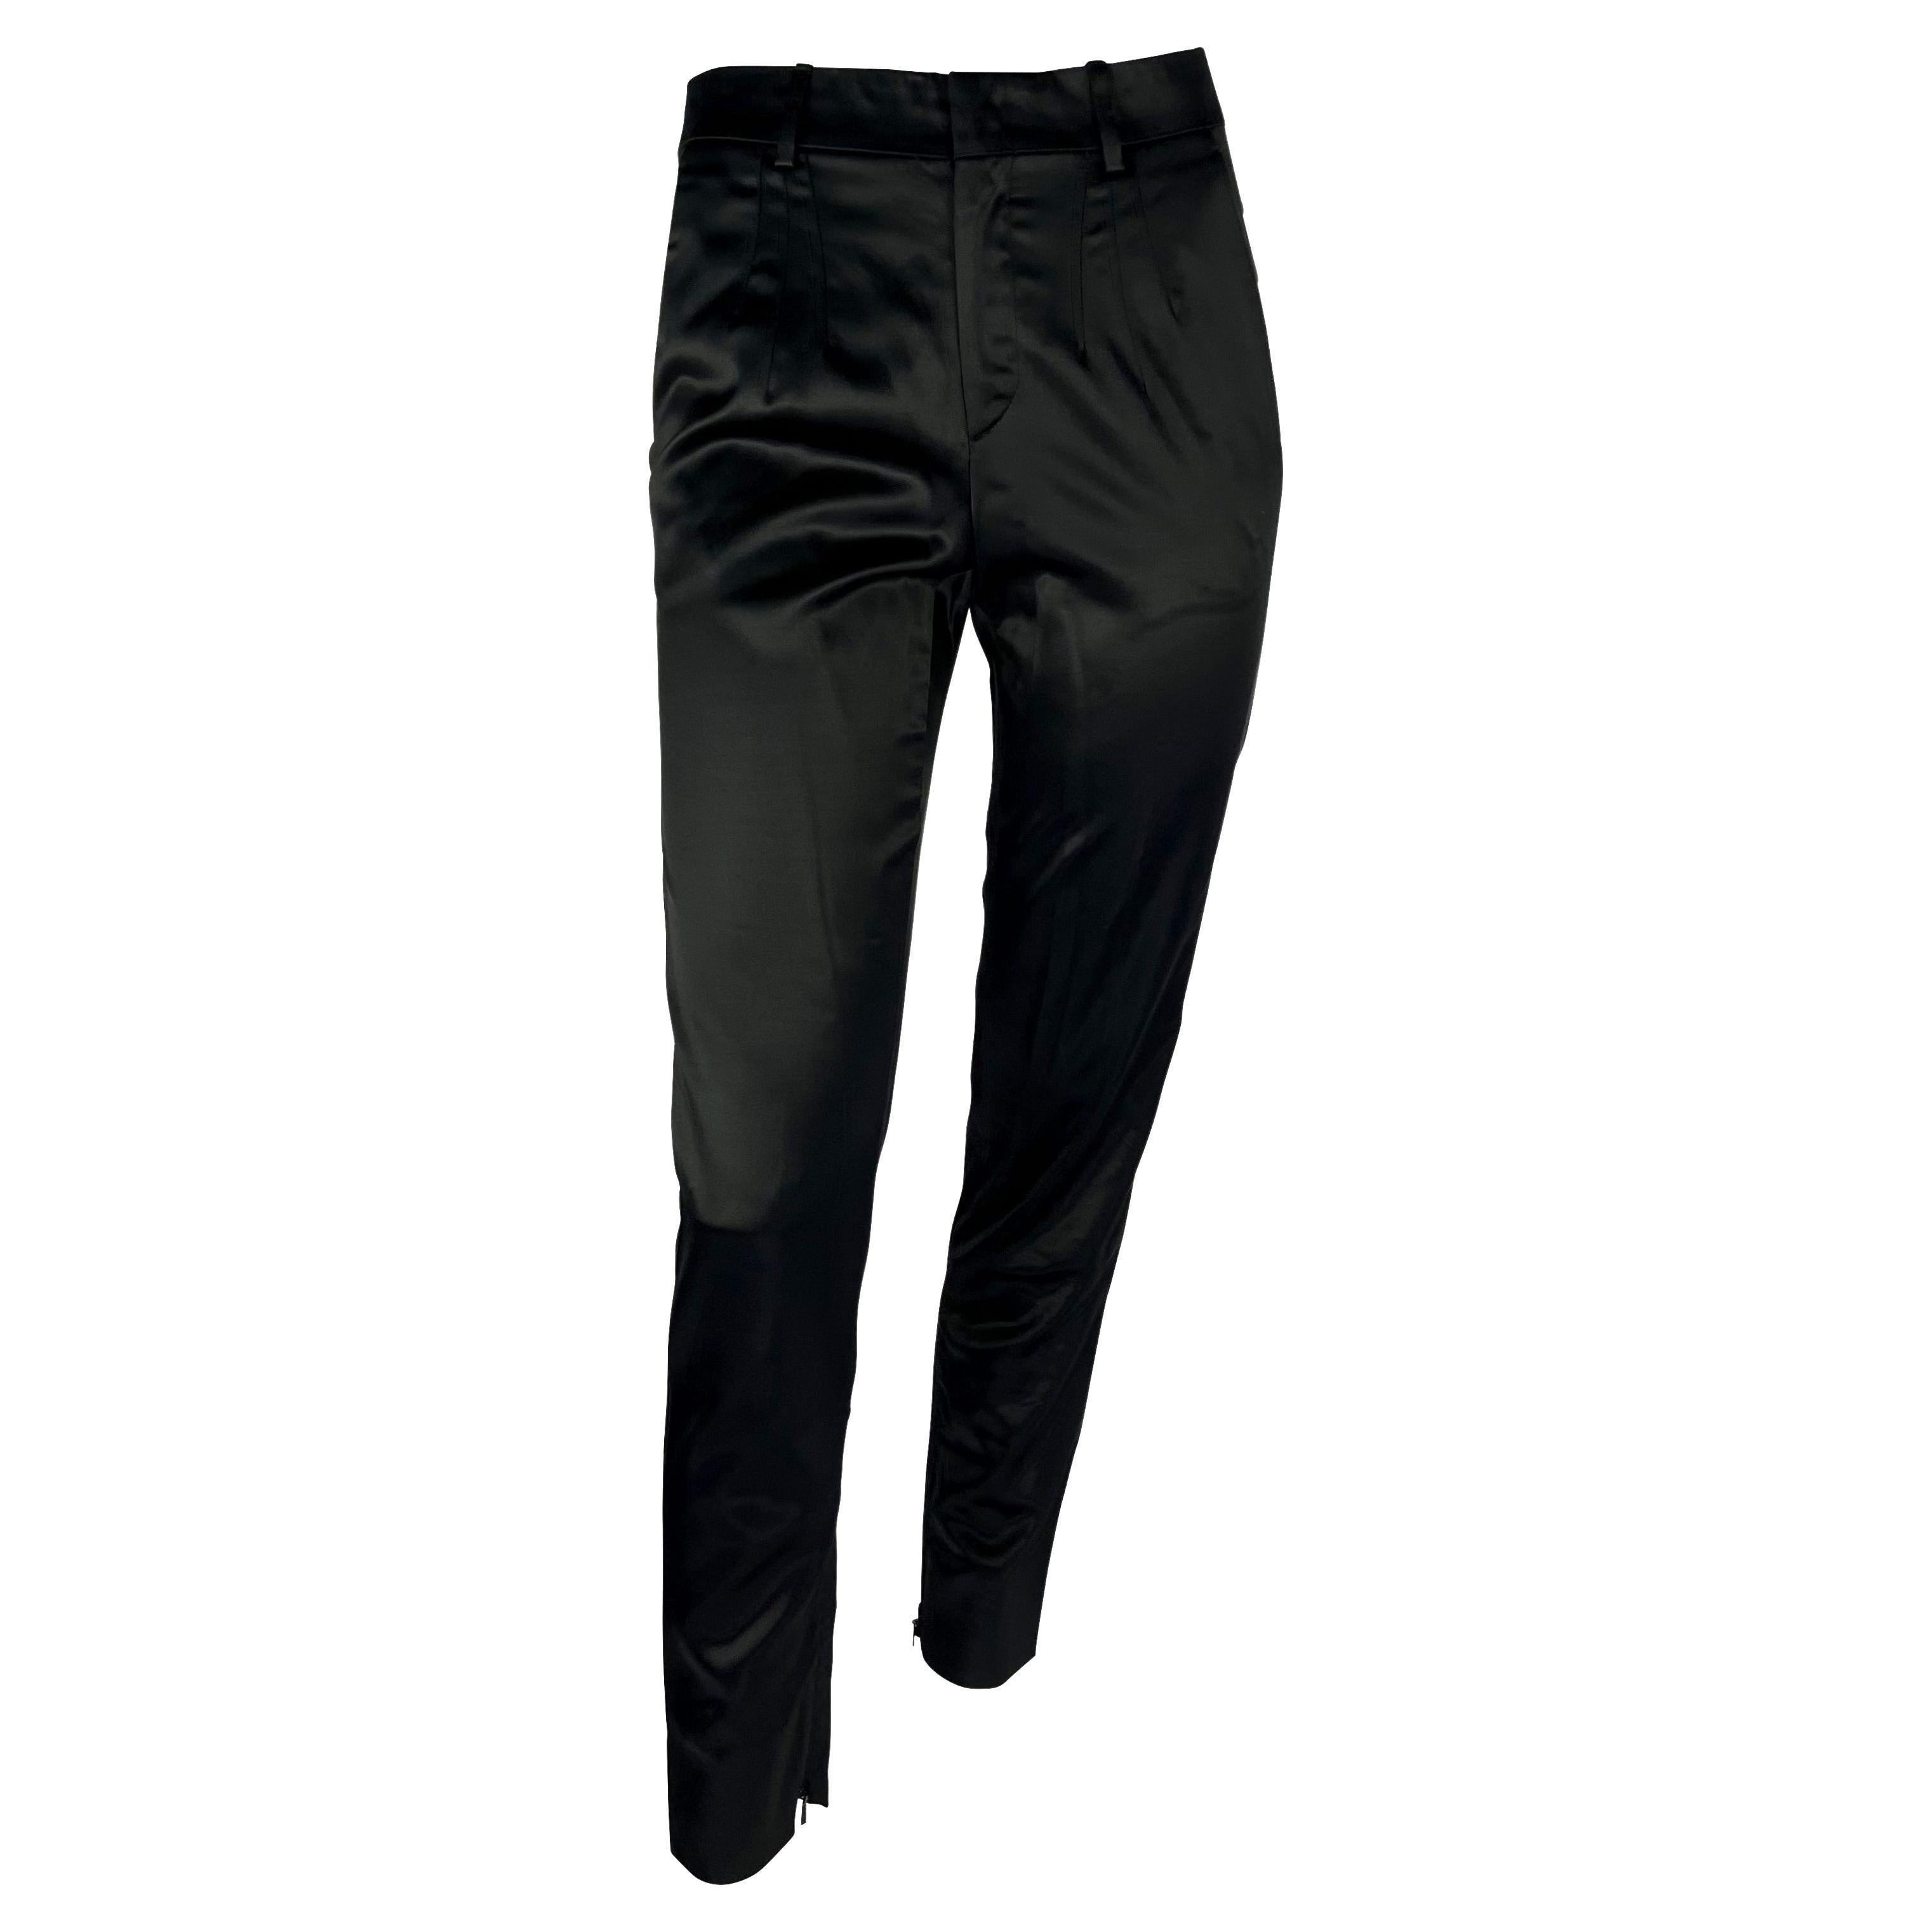 S/S 2001 Gucci by Tom Ford Black Satin Tapered Pants For Sale